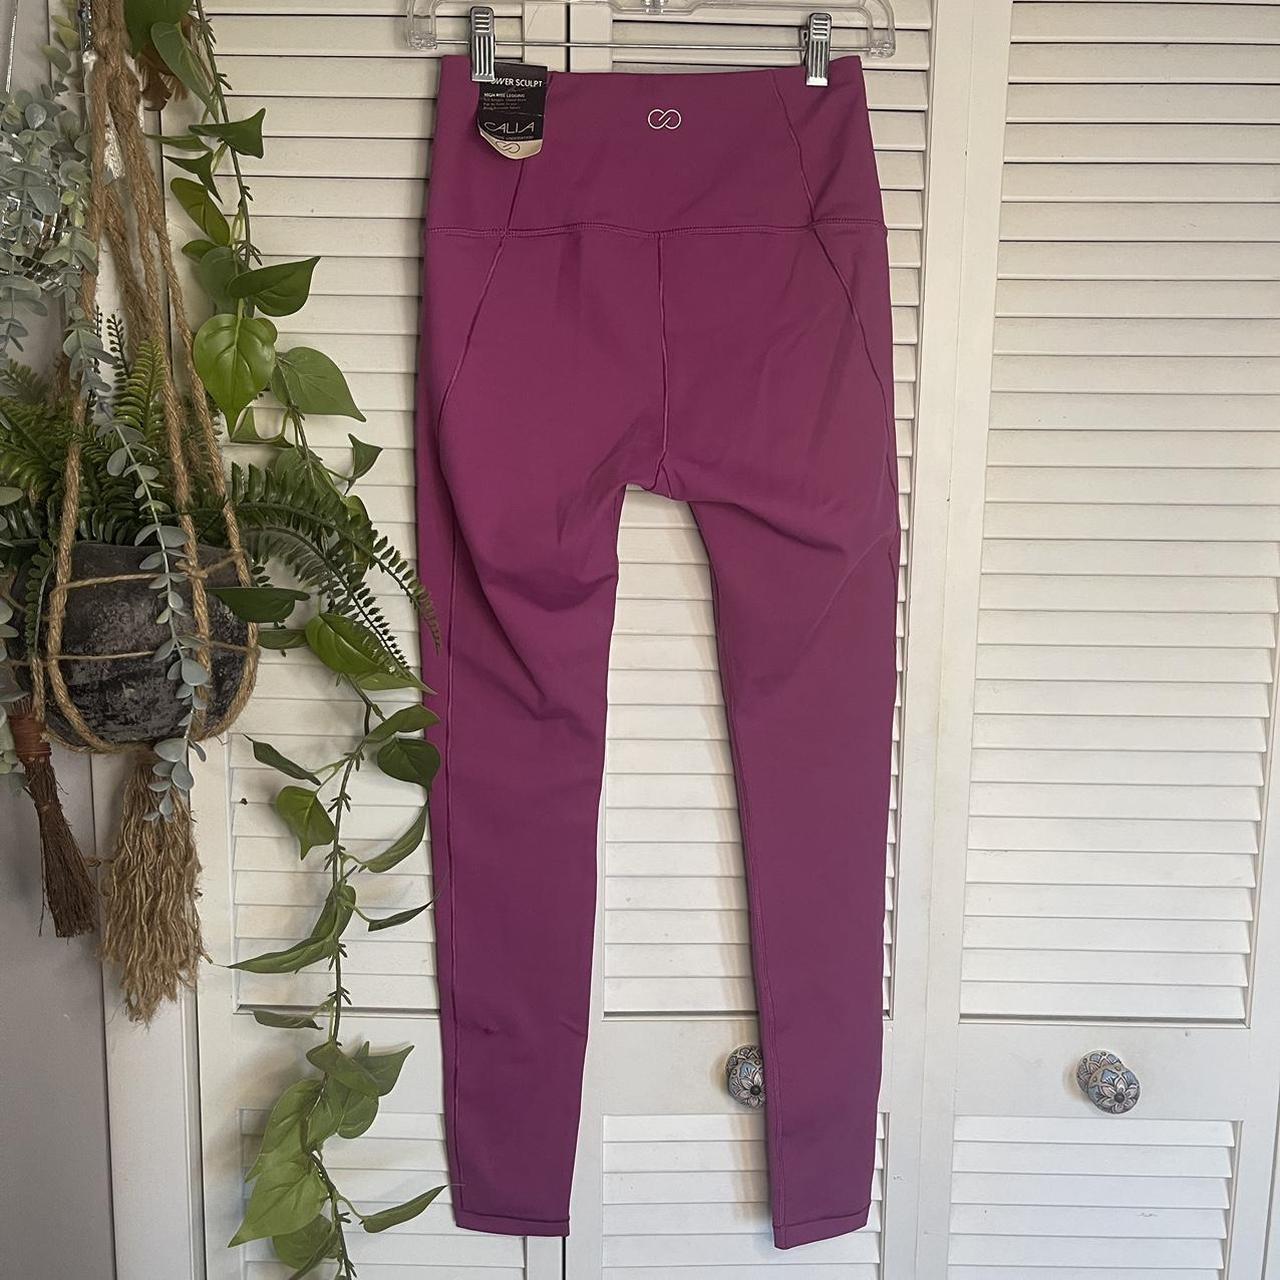 Calia by Carrie Underwood Solid Purple Leggings Size M - 59% off